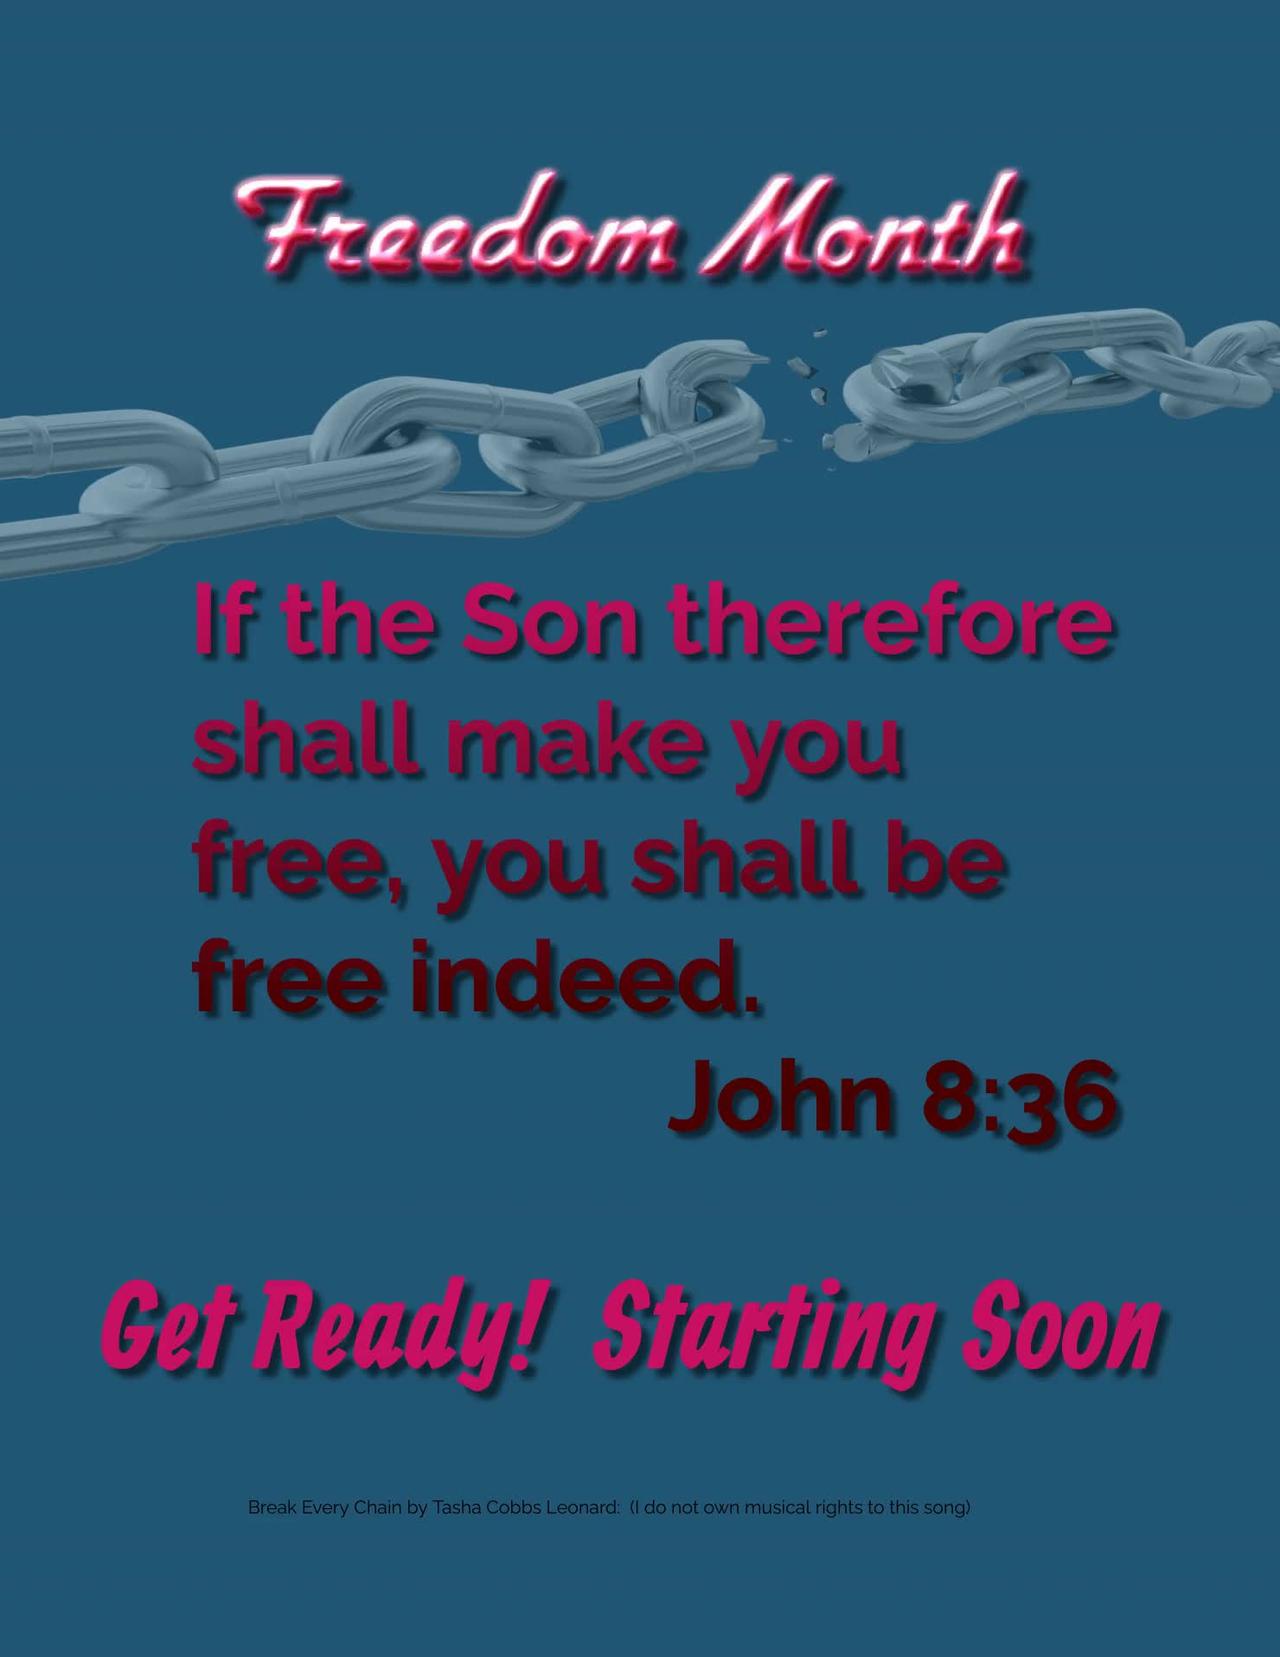 Freedom Month - If Truth makes you free, what does a LIE make you?